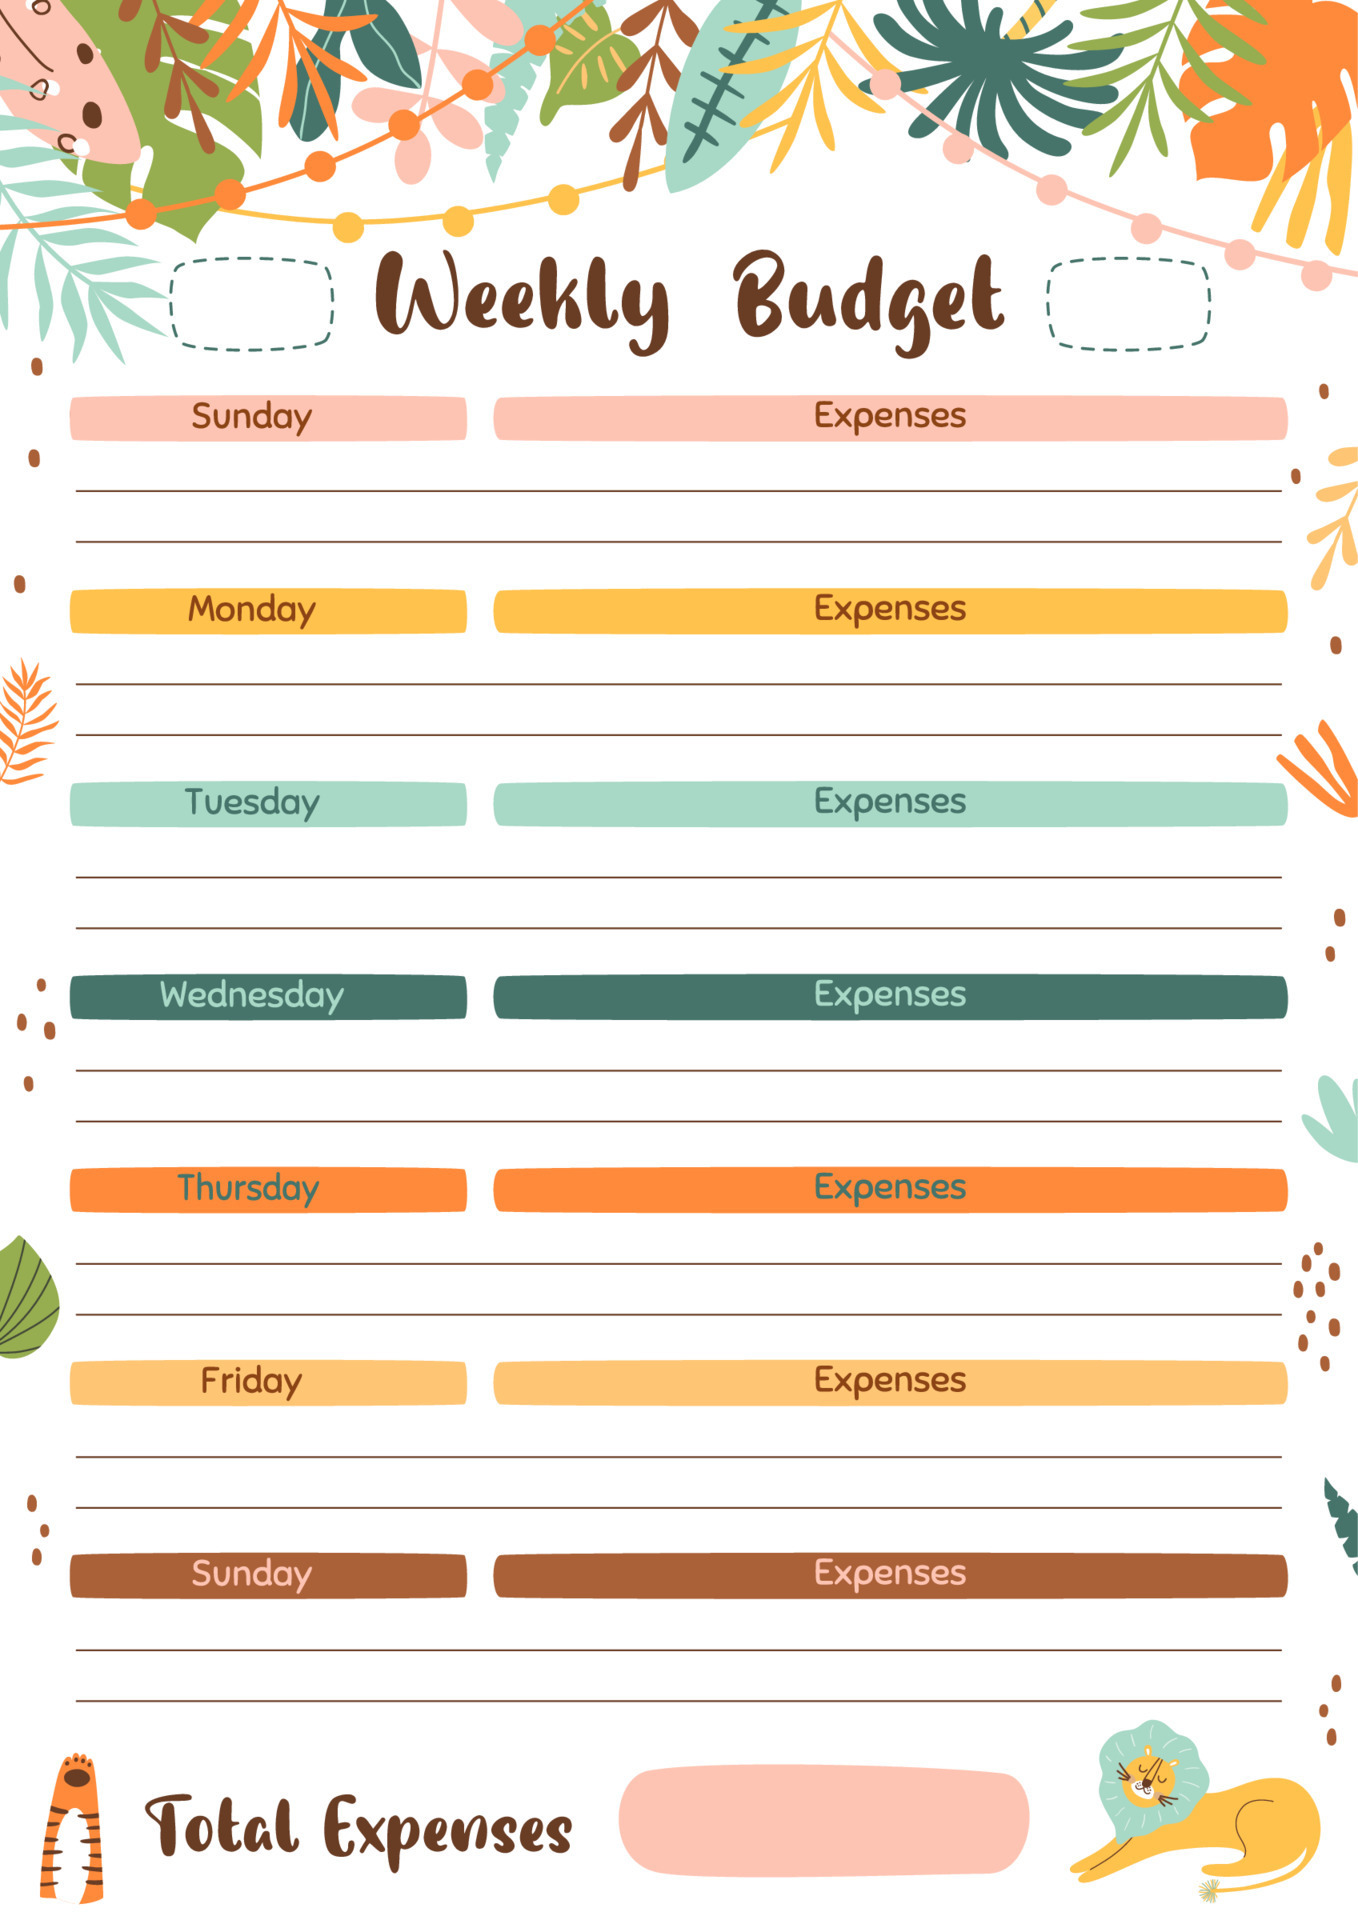 weekly-budget-planner-template-for-print-week-plan-printable-design-for-home-budget-worksheet-a4-size-illustration-bright-tropical-jungle-frame-cute-lion-vector.jpg